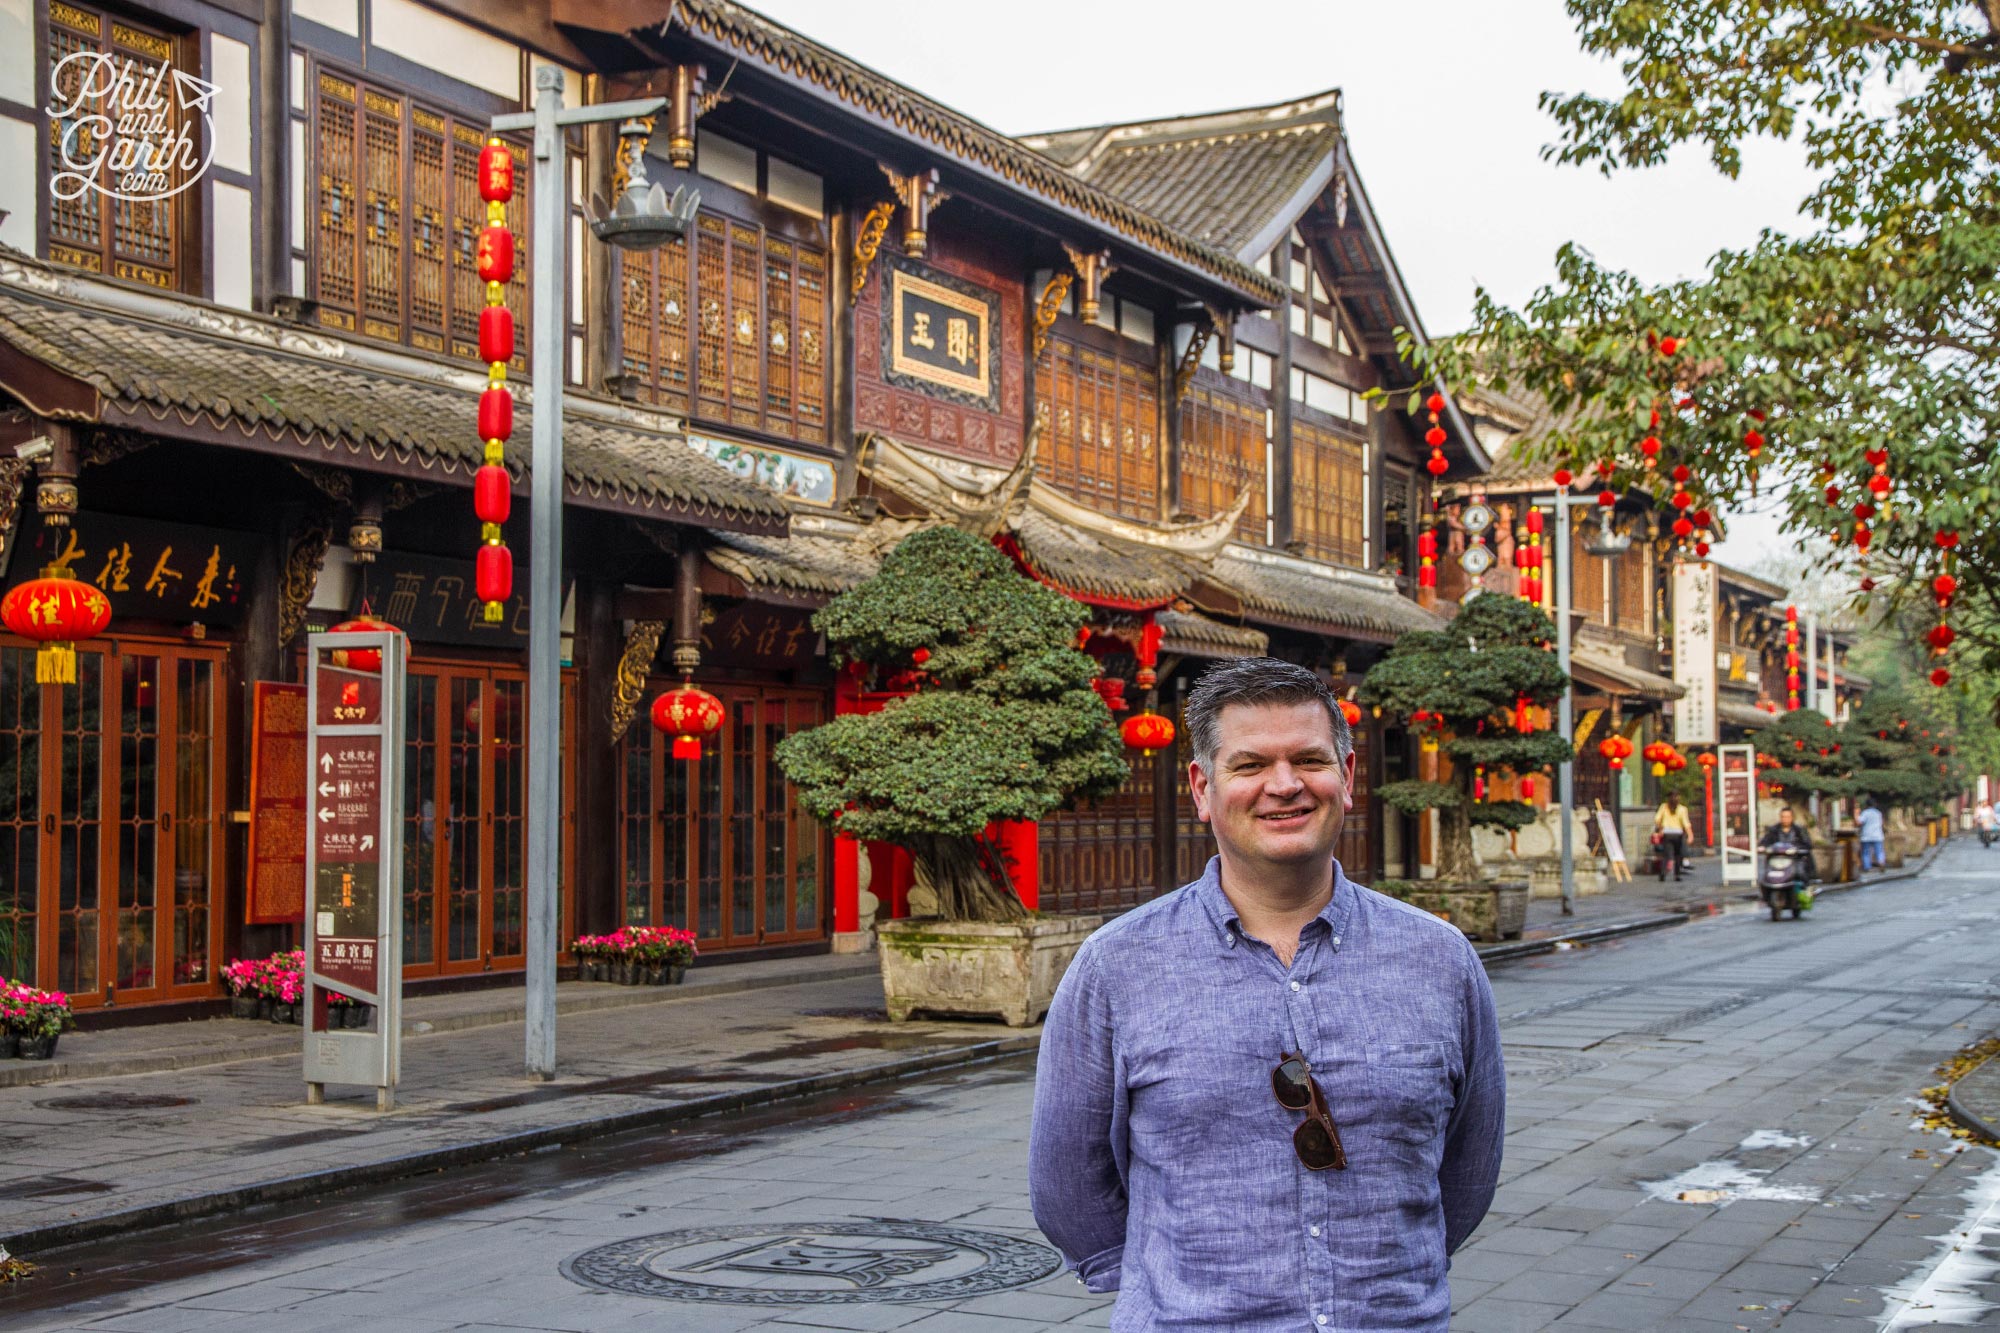 Phil on Wenshuyuan Street in the early morning, No. 1 of our Chengdu attractions